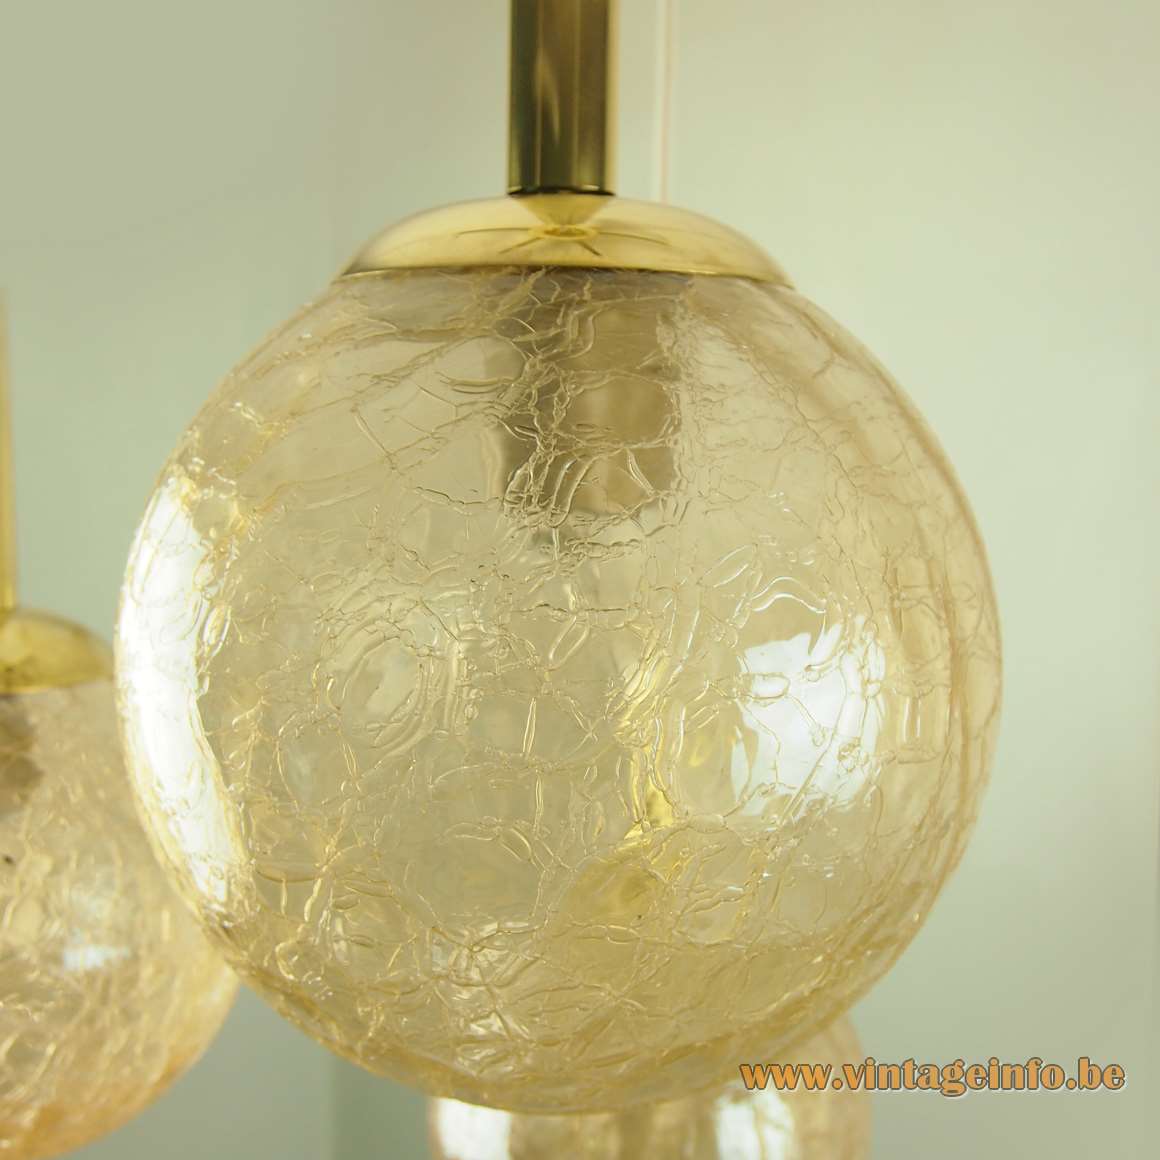 DORIA crackle glass globes chandelier 6 amber cascading pendant lamps brass tubes 1970s Germany